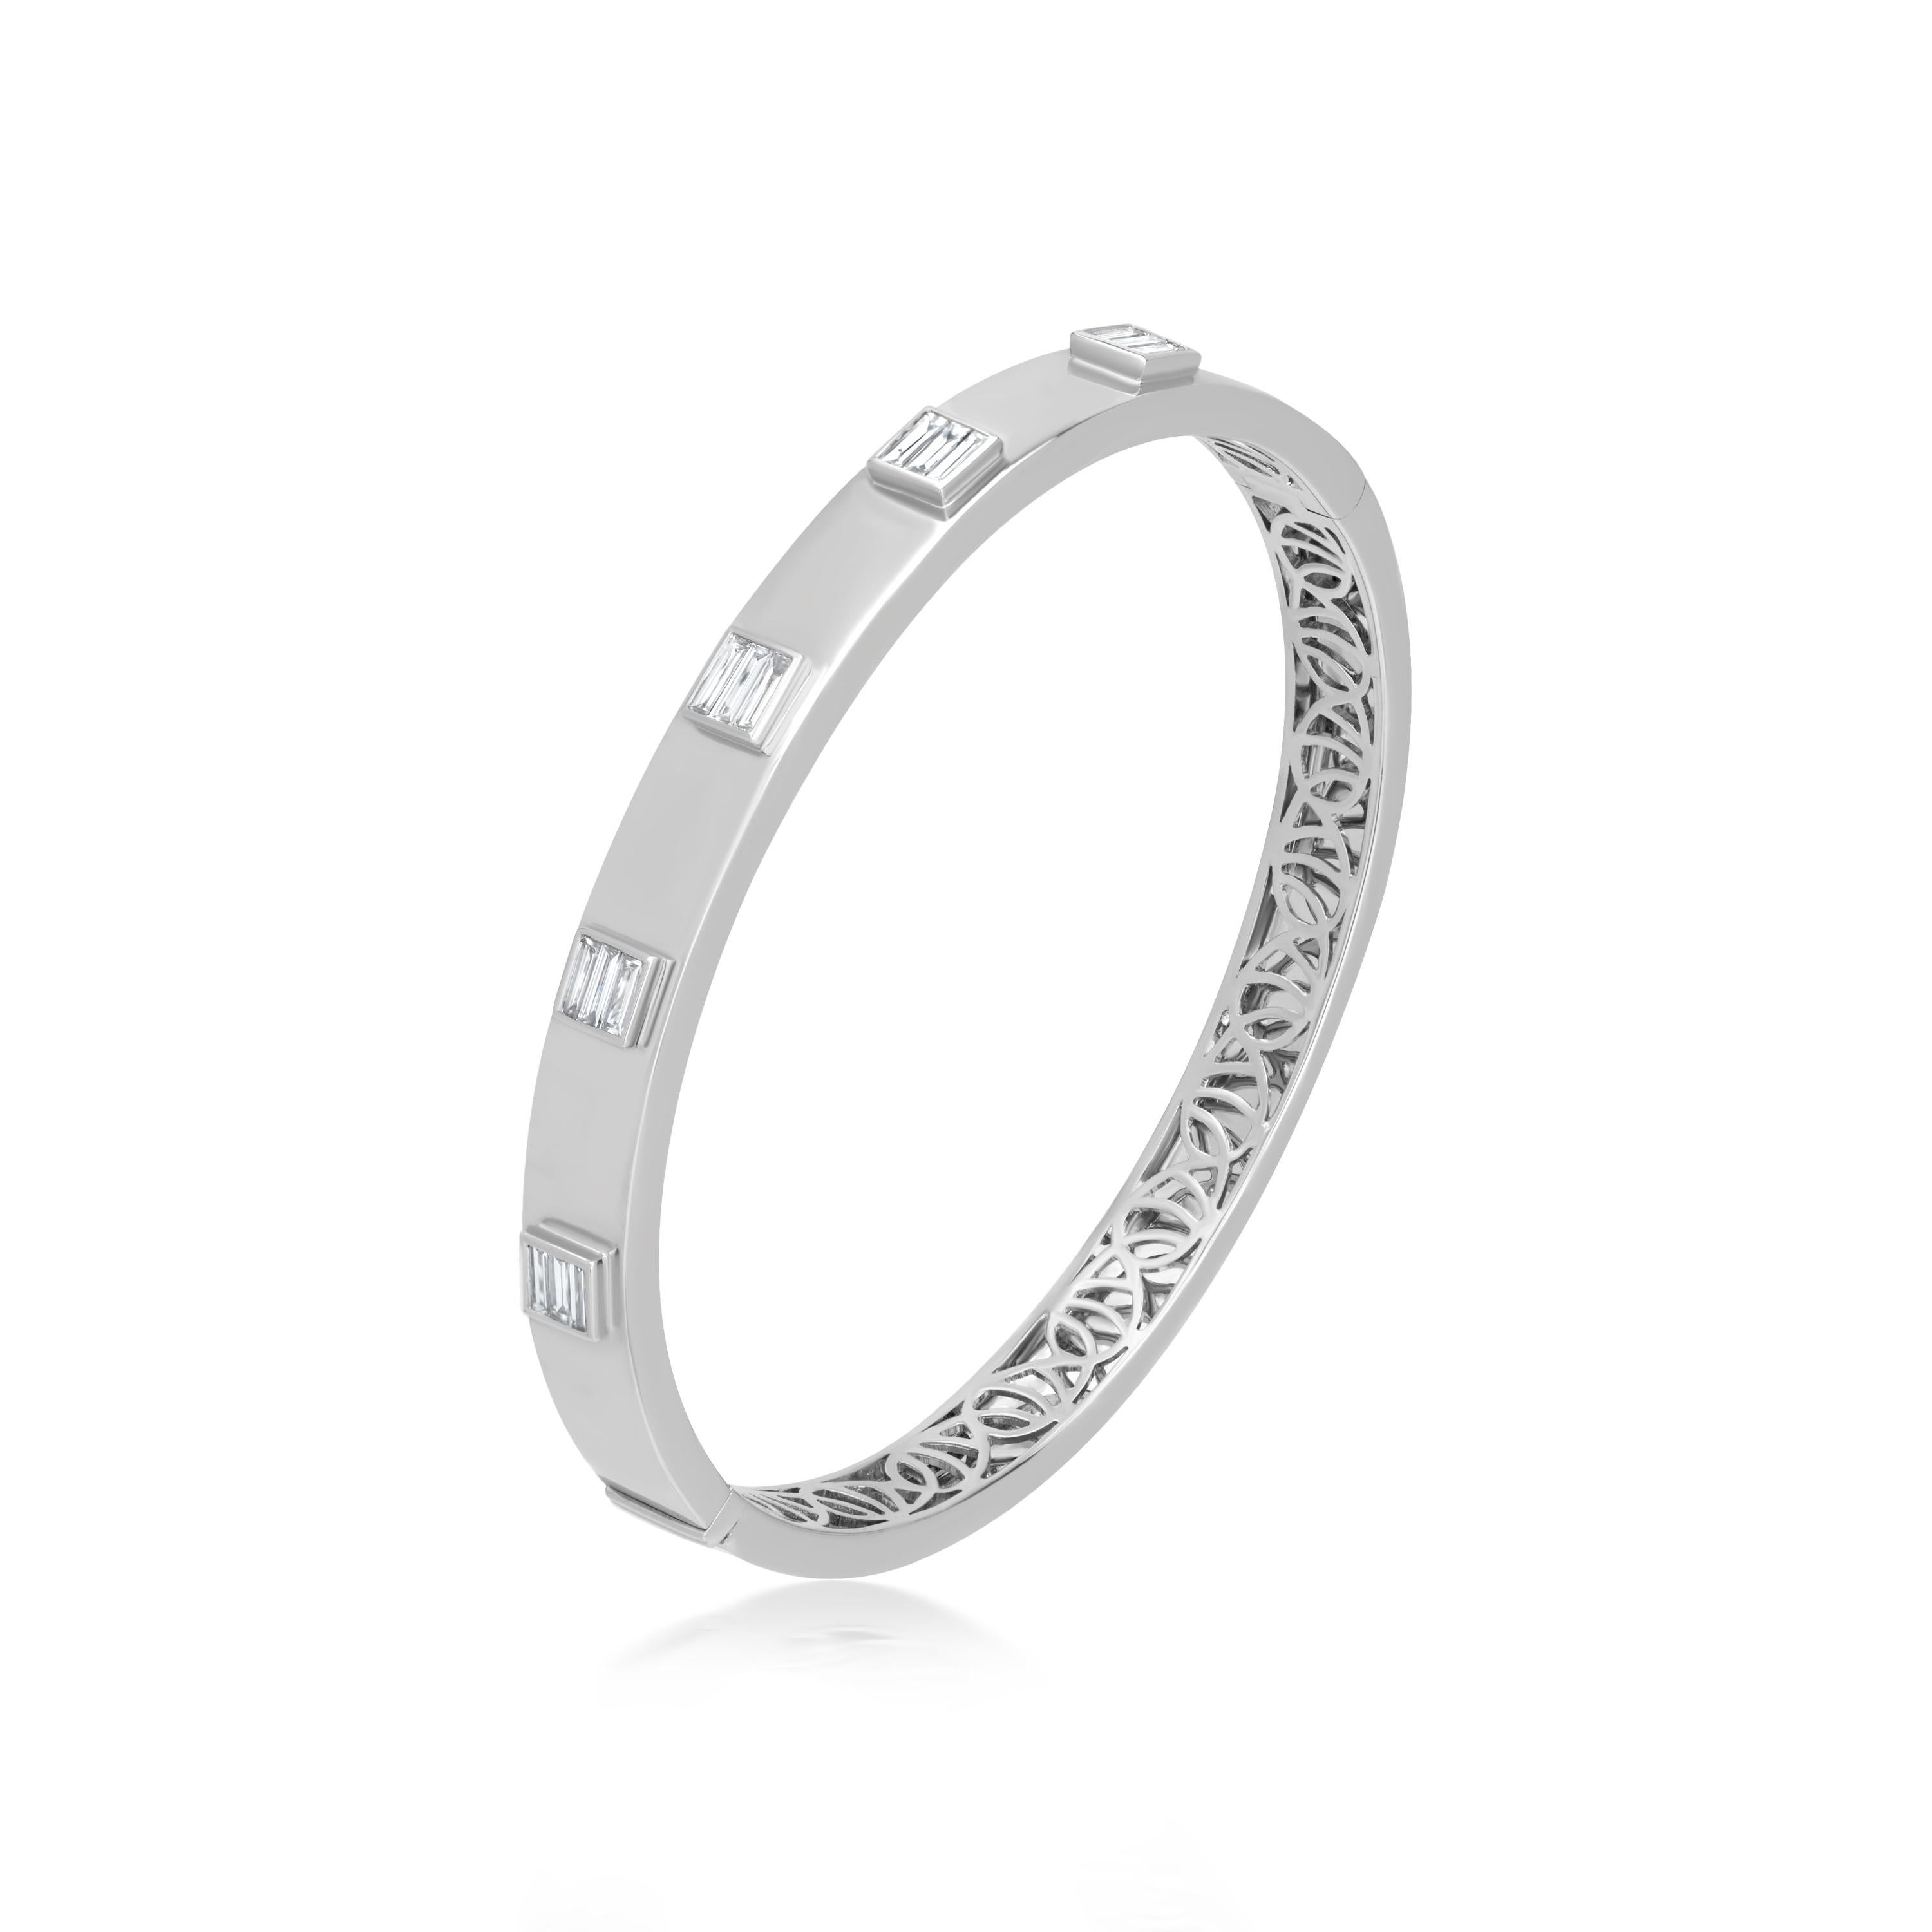 Adorn yourself with this spectacular bangle bracelet 0.66 ct. t.w. bezel set baguette full-cut diamonds alternate on polished 18k white gold. The inner back of the bangle bracelet is further accentuated by curvilinear lattice. Inner Dimension : 50mm